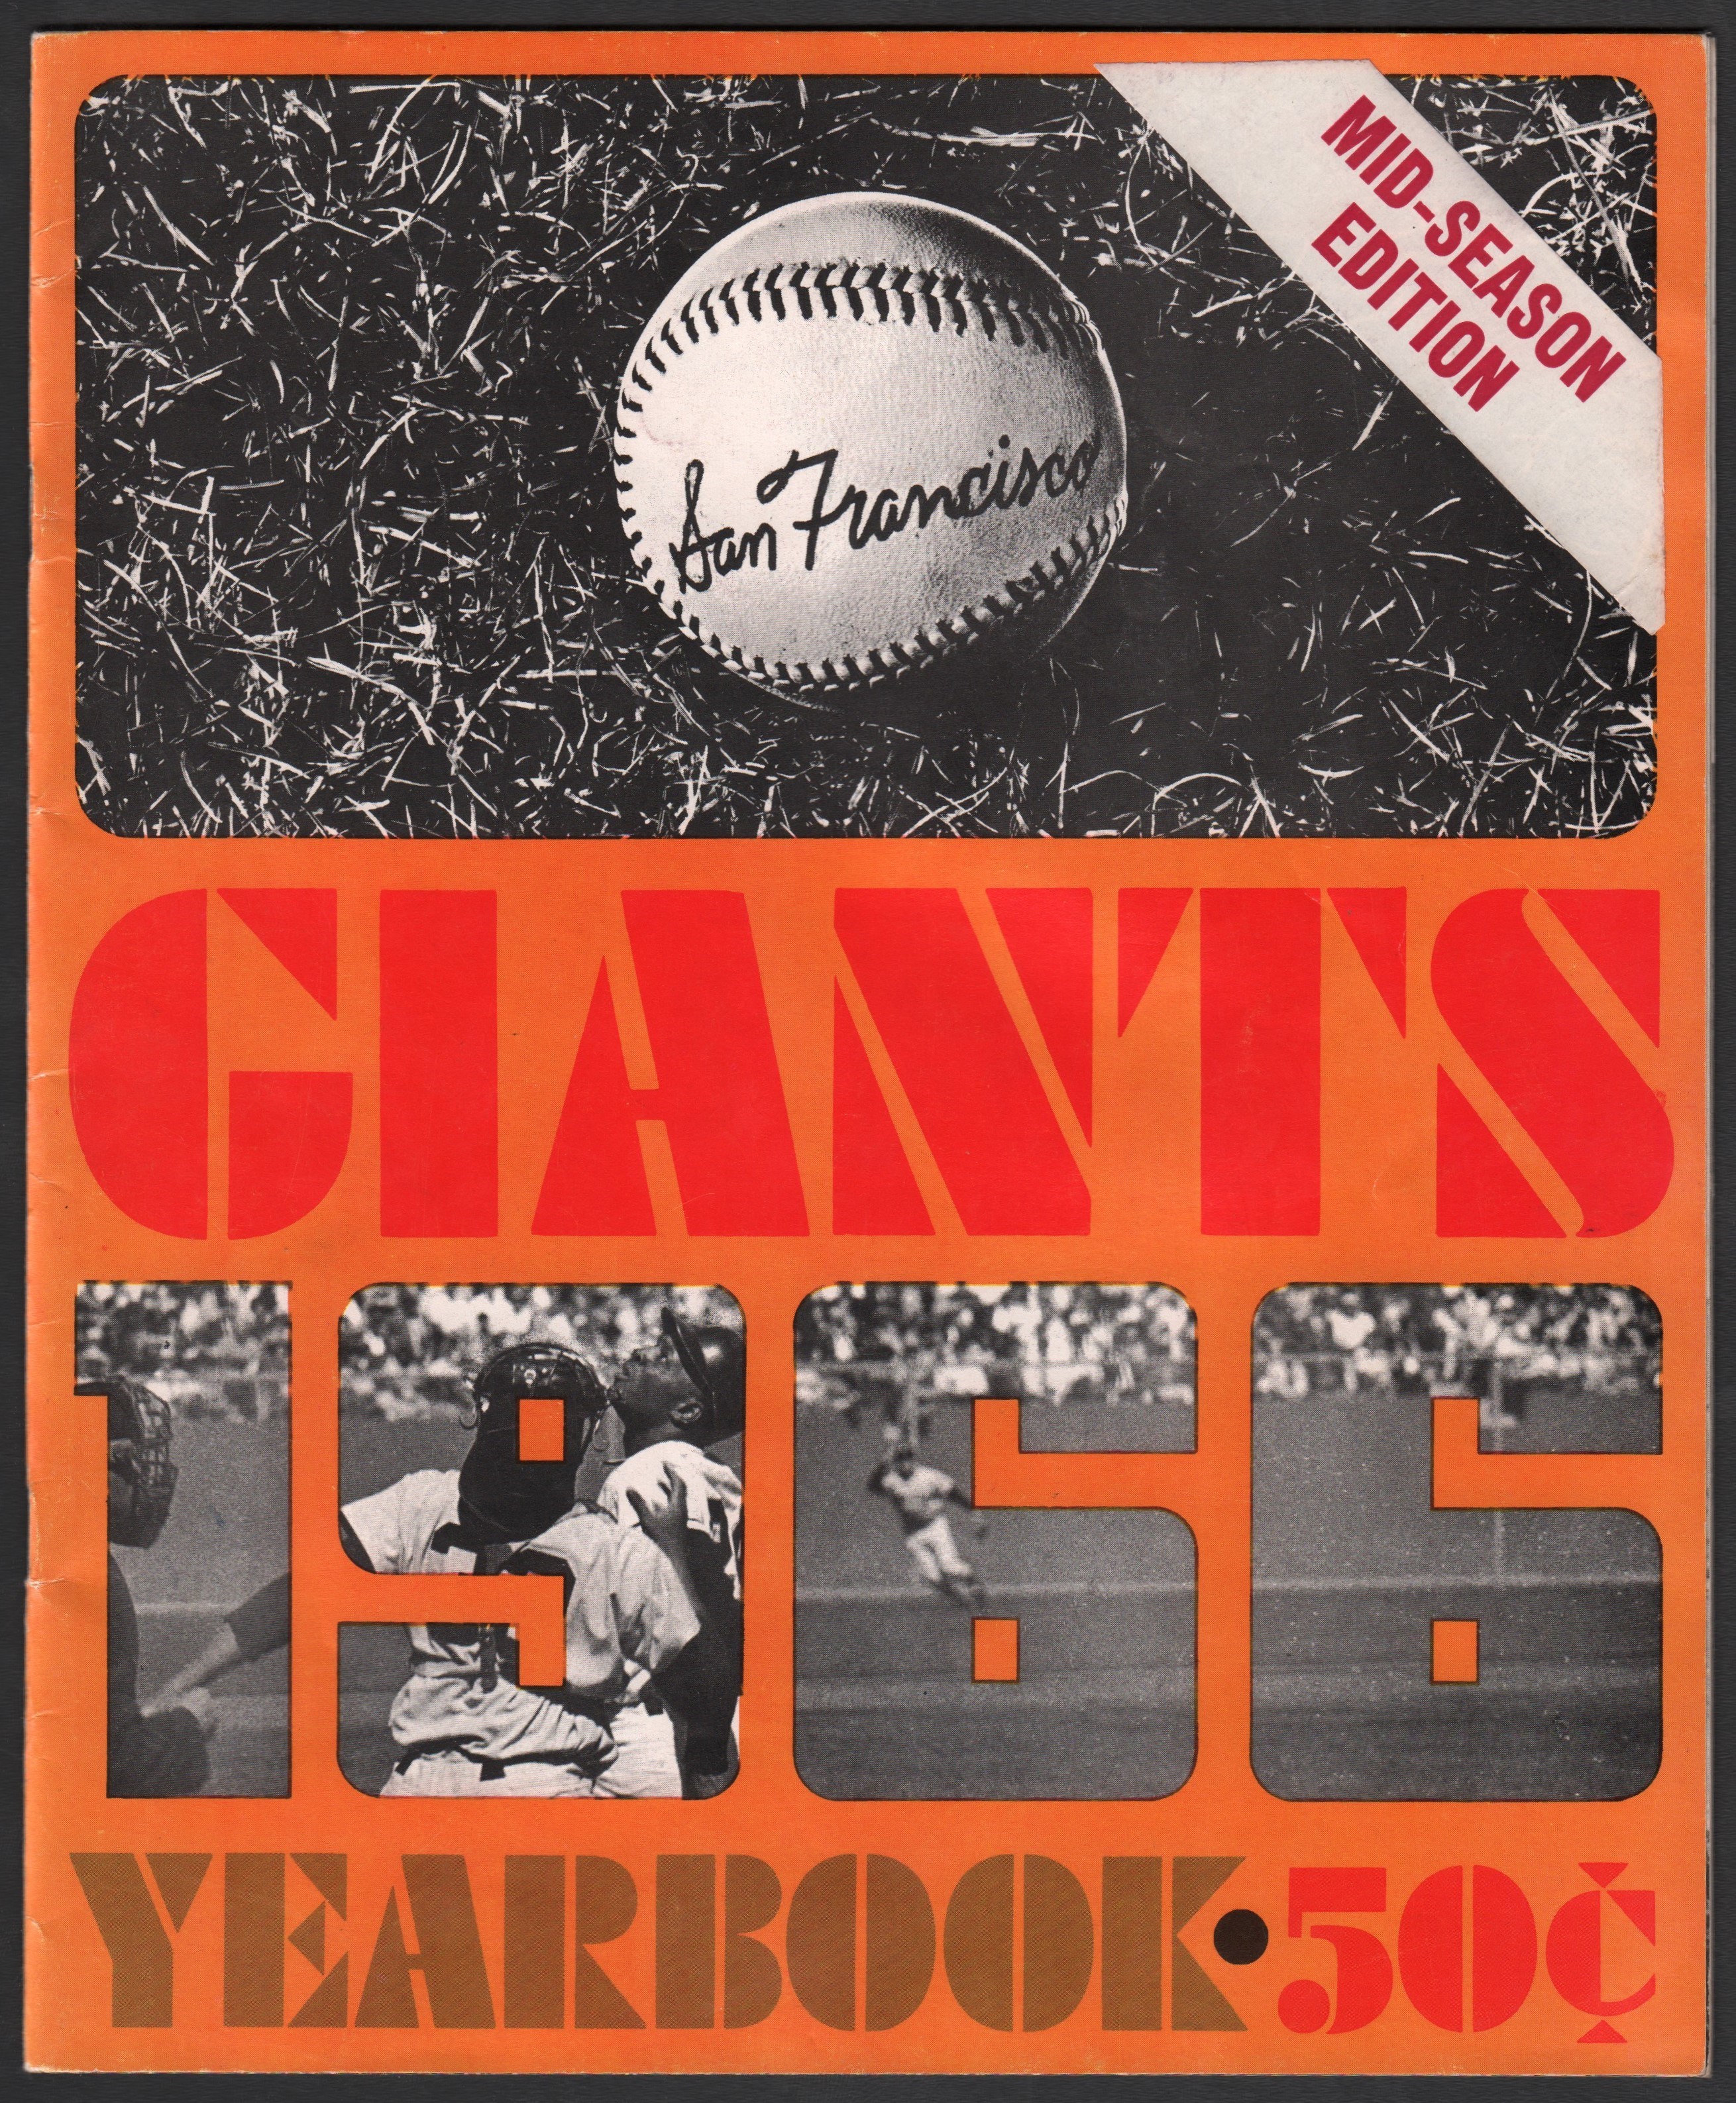 Baseball Autographs - 1966 San Francisco Giants Vintage Signed Yearbook with 23 Signatures including Mays